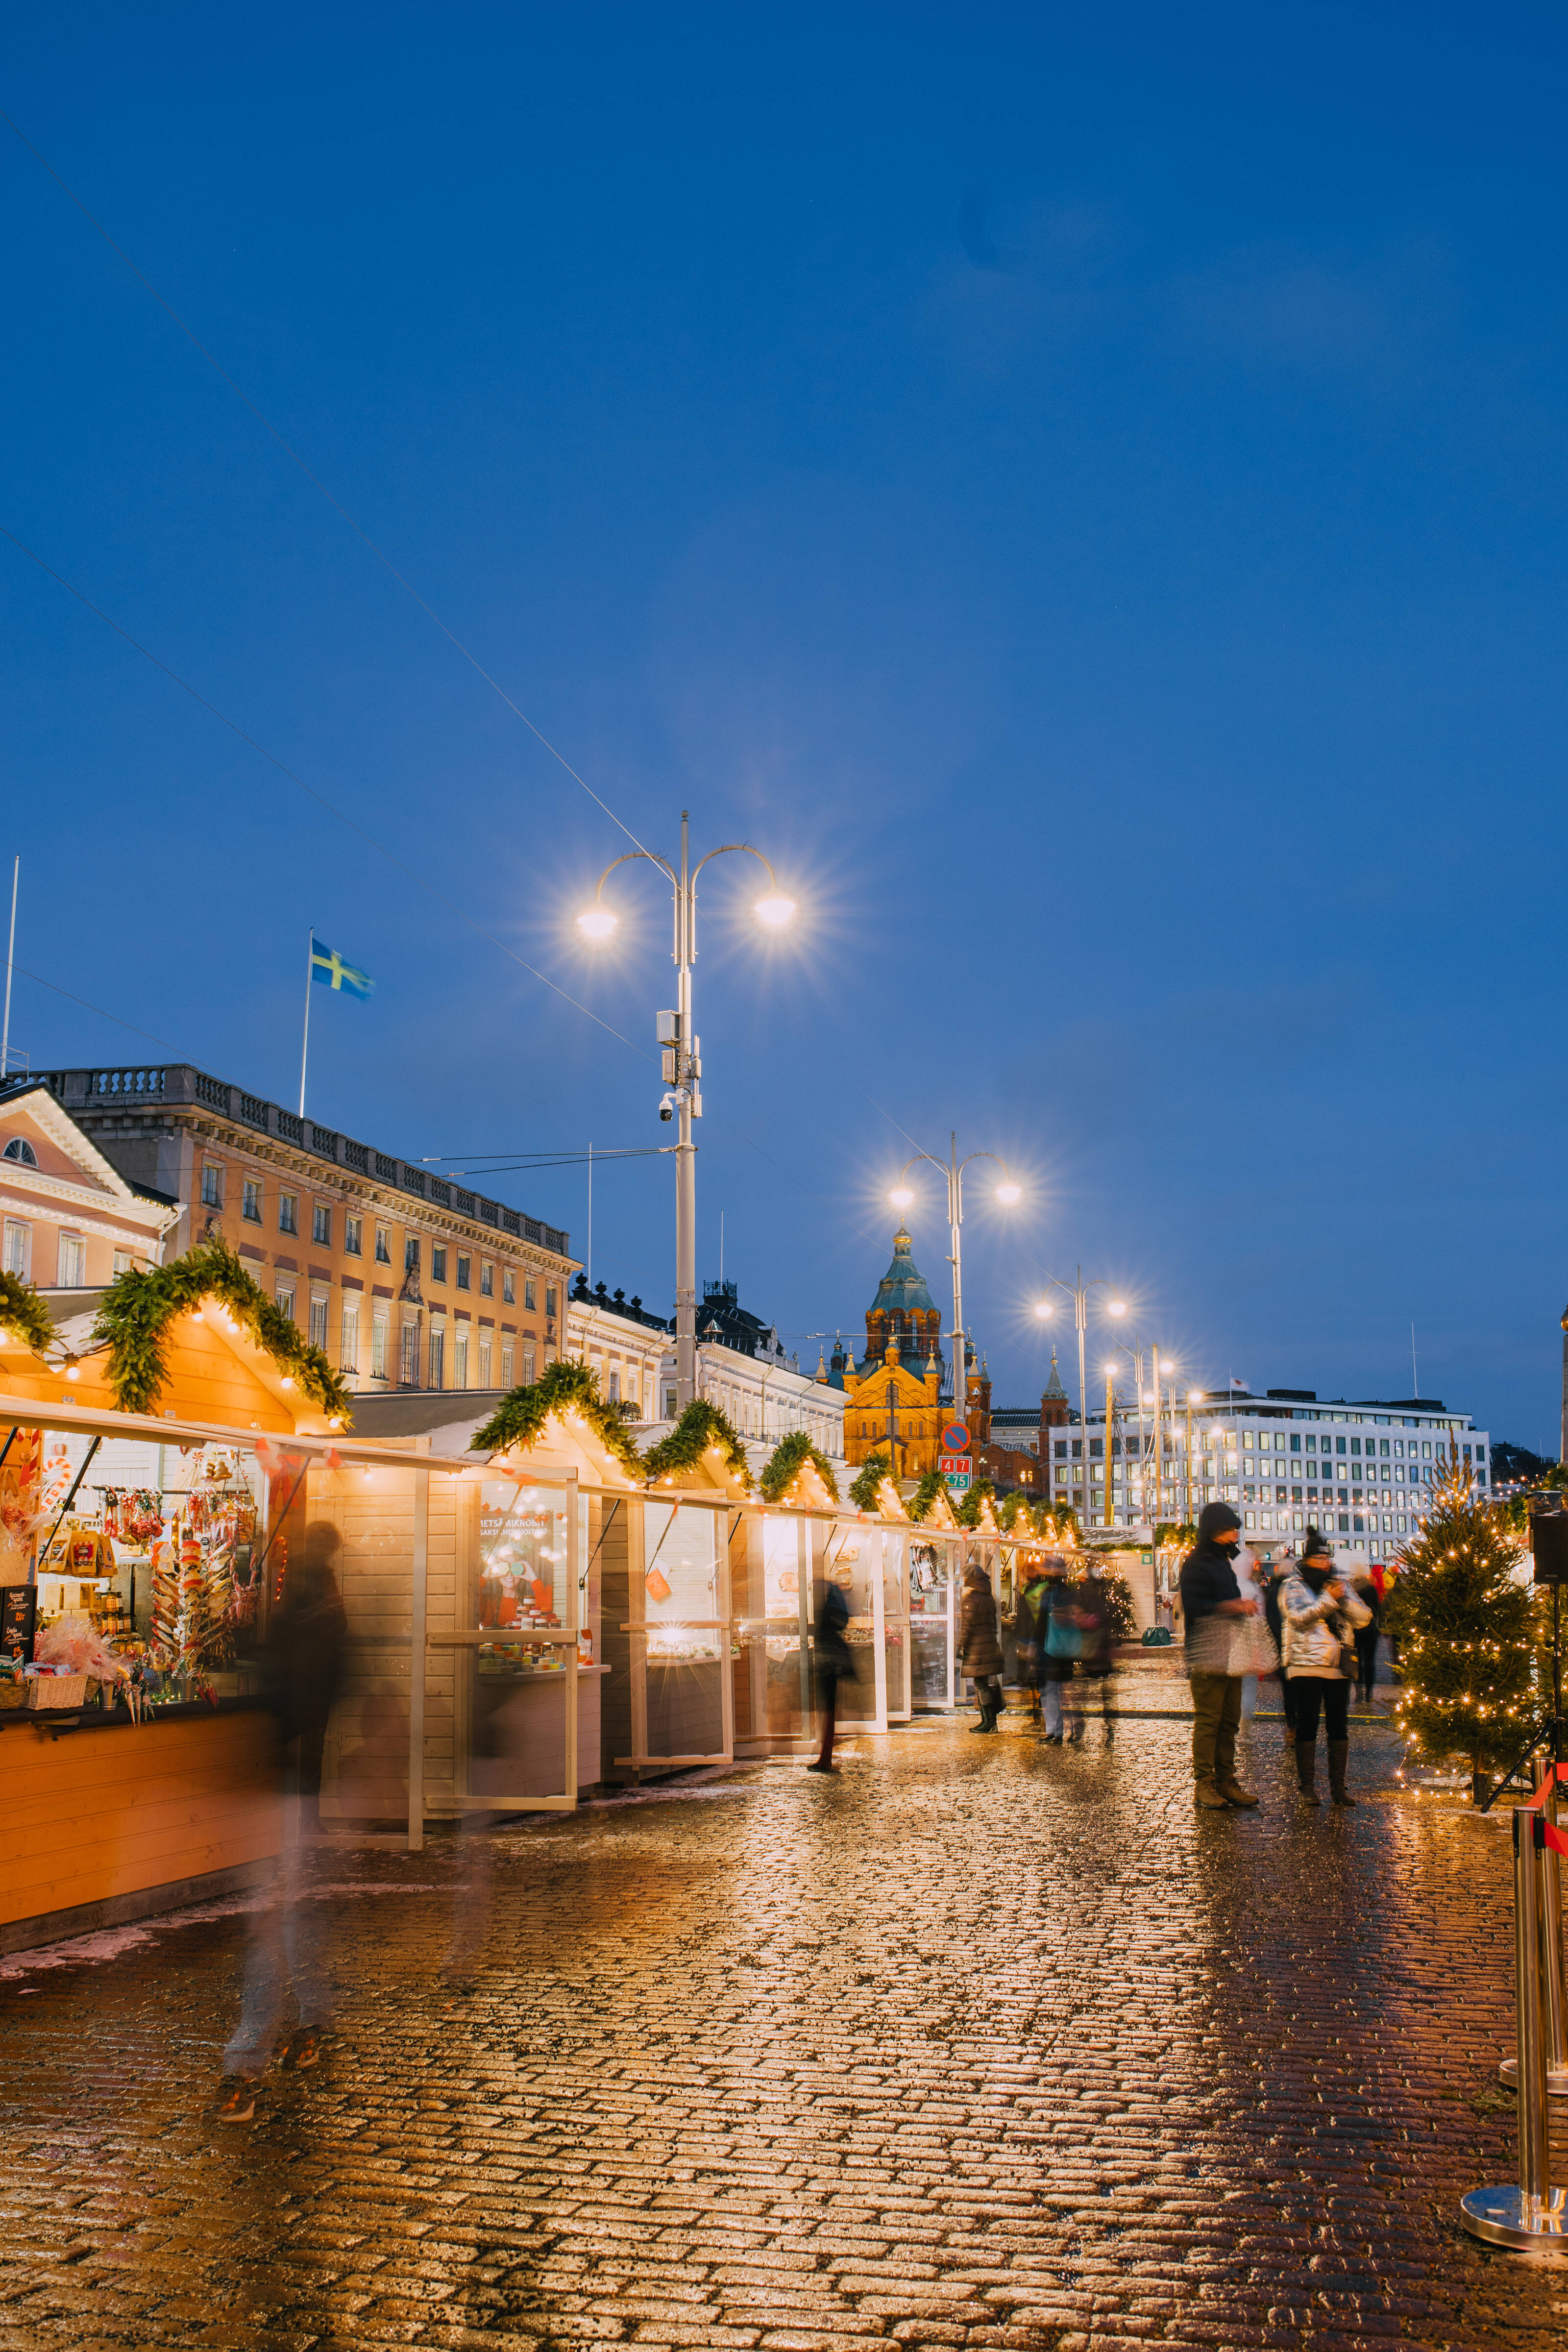 a row of booths in a Christmas market in Helsinki, Finland